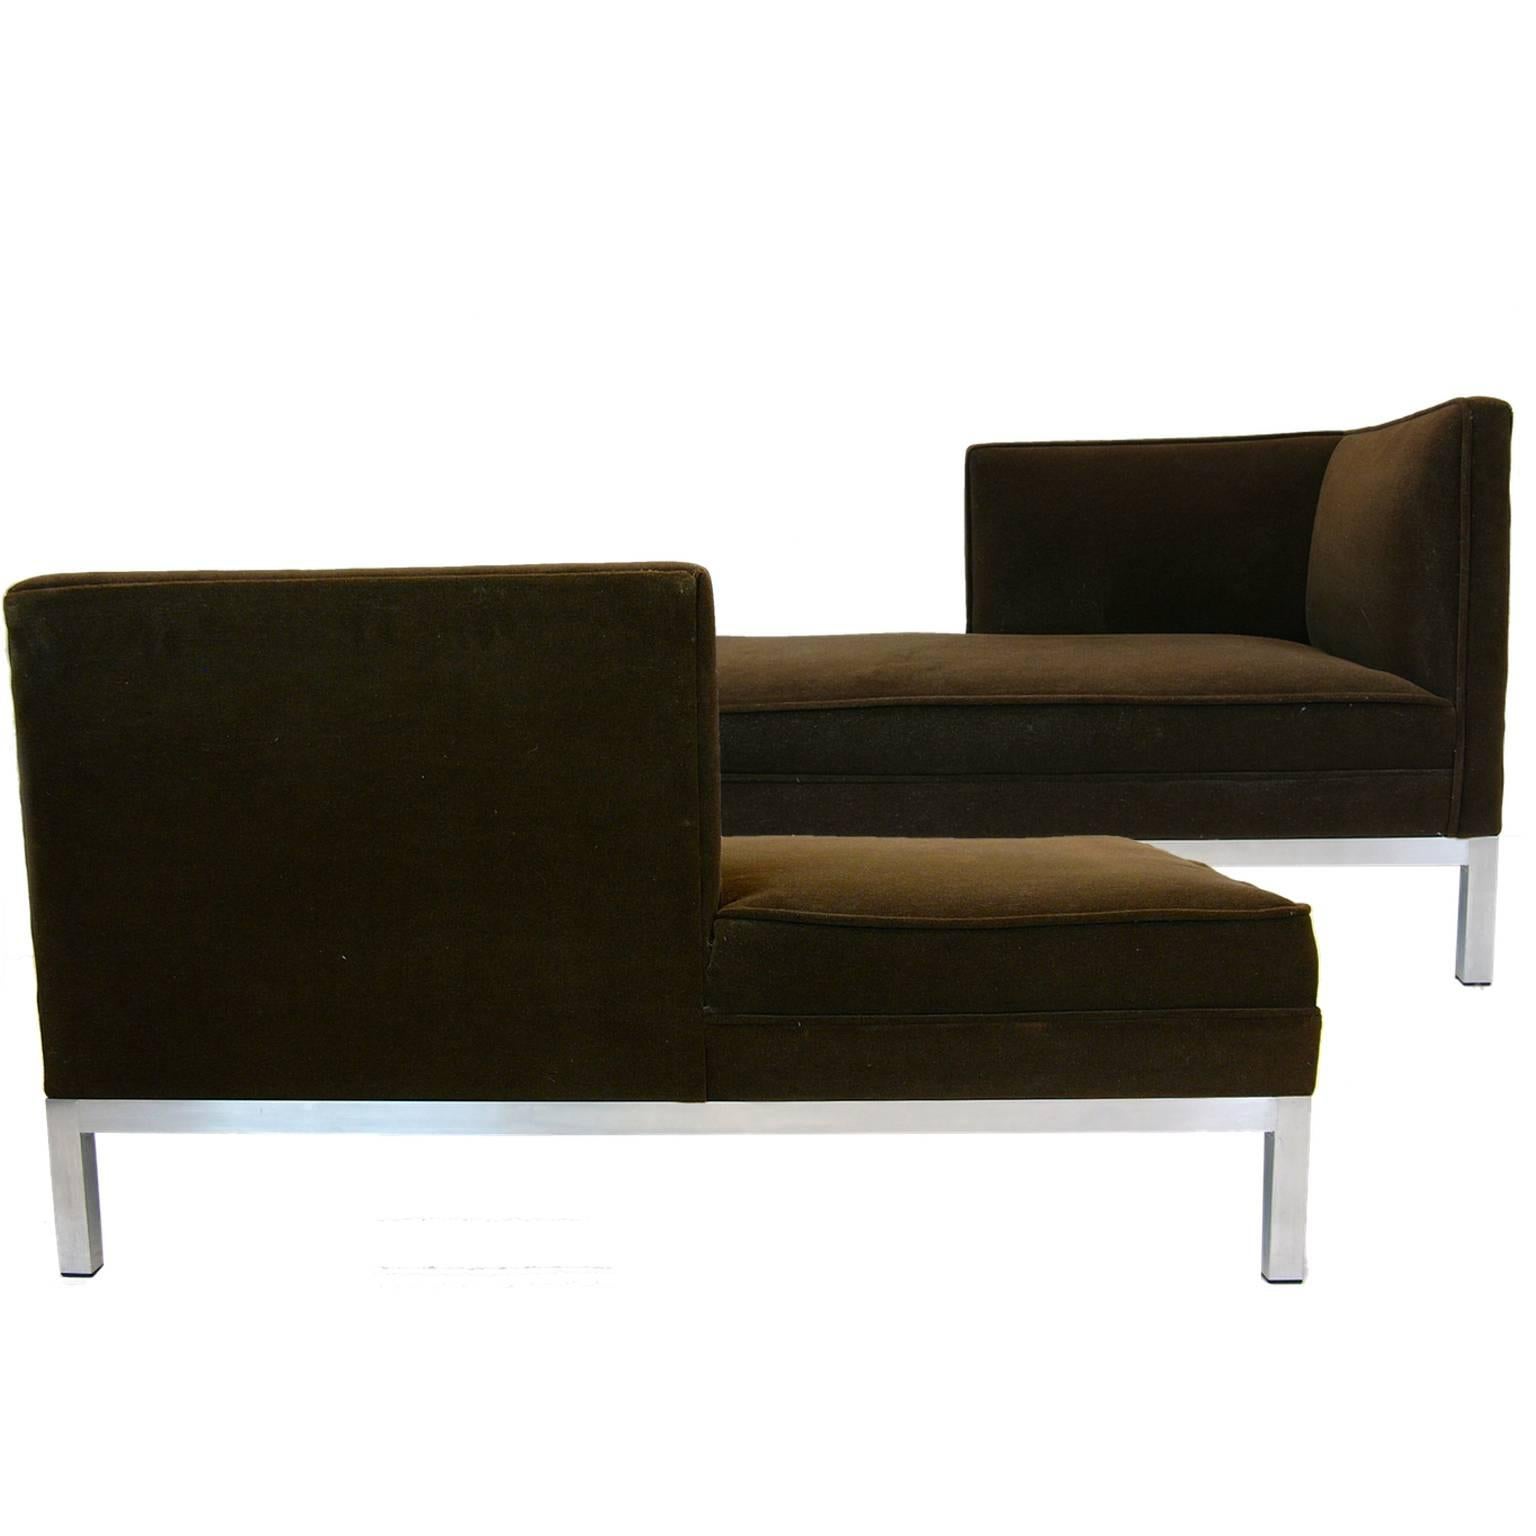 Pair of identical Charter/ Brown Jordan chaise longues in a deep brown velour upholstery. The base/ legs are a brushed aluminum. The pair can be configured to create a lovely tête-à-tête as shown. Priced per piece.